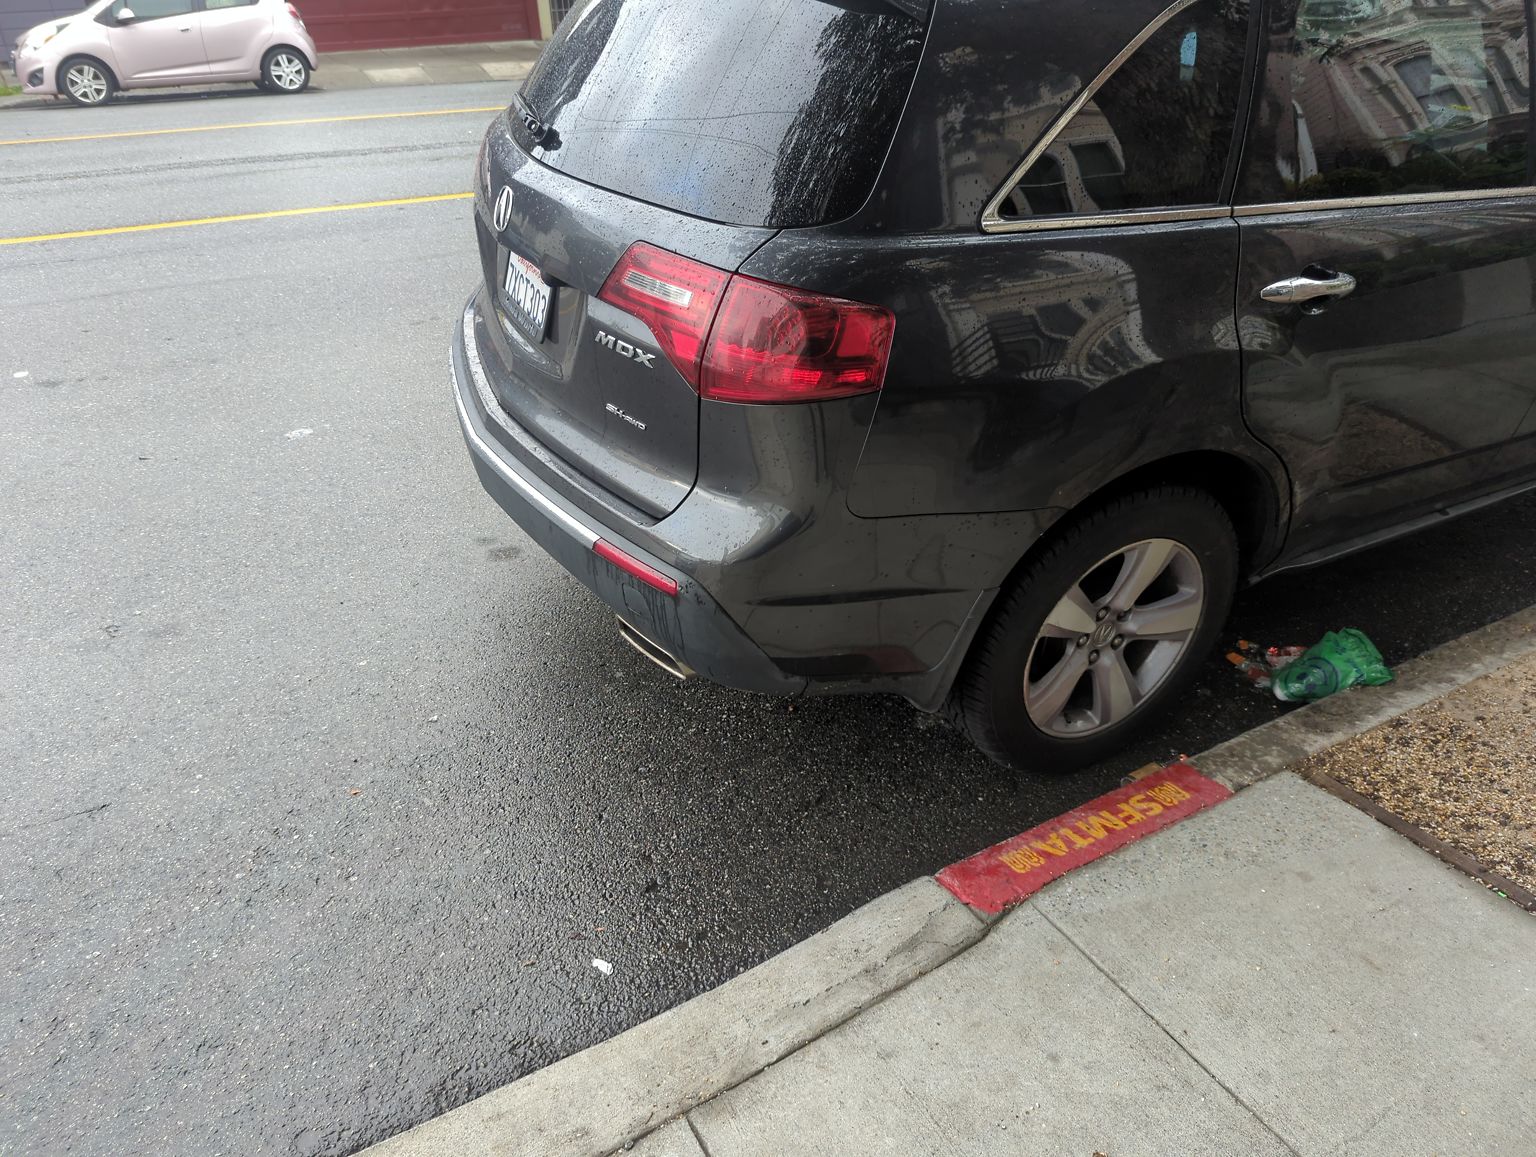 Photo of car in the street with license plate 7XCT303 in California